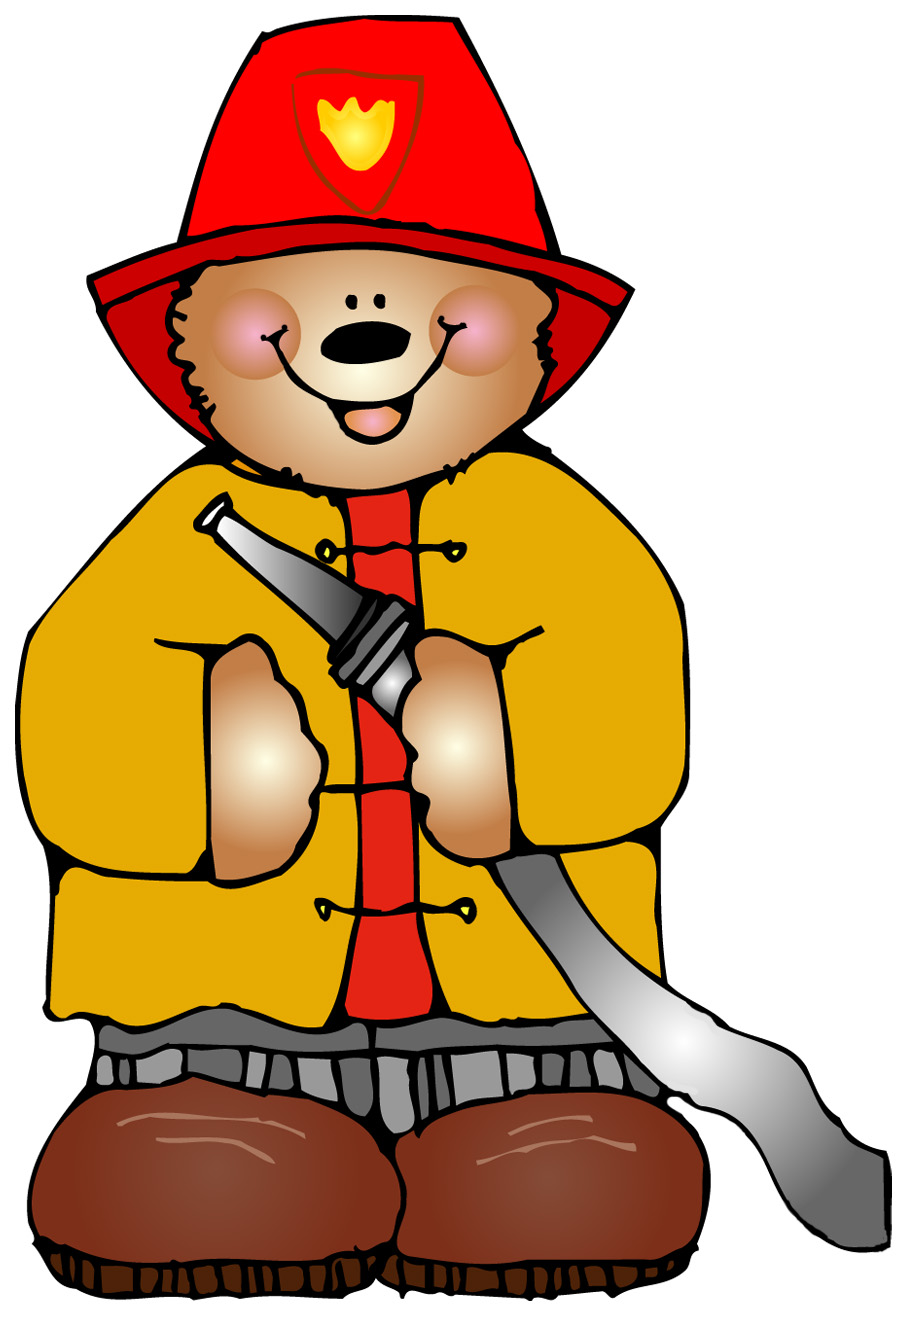 clipart of fire safety - photo #2